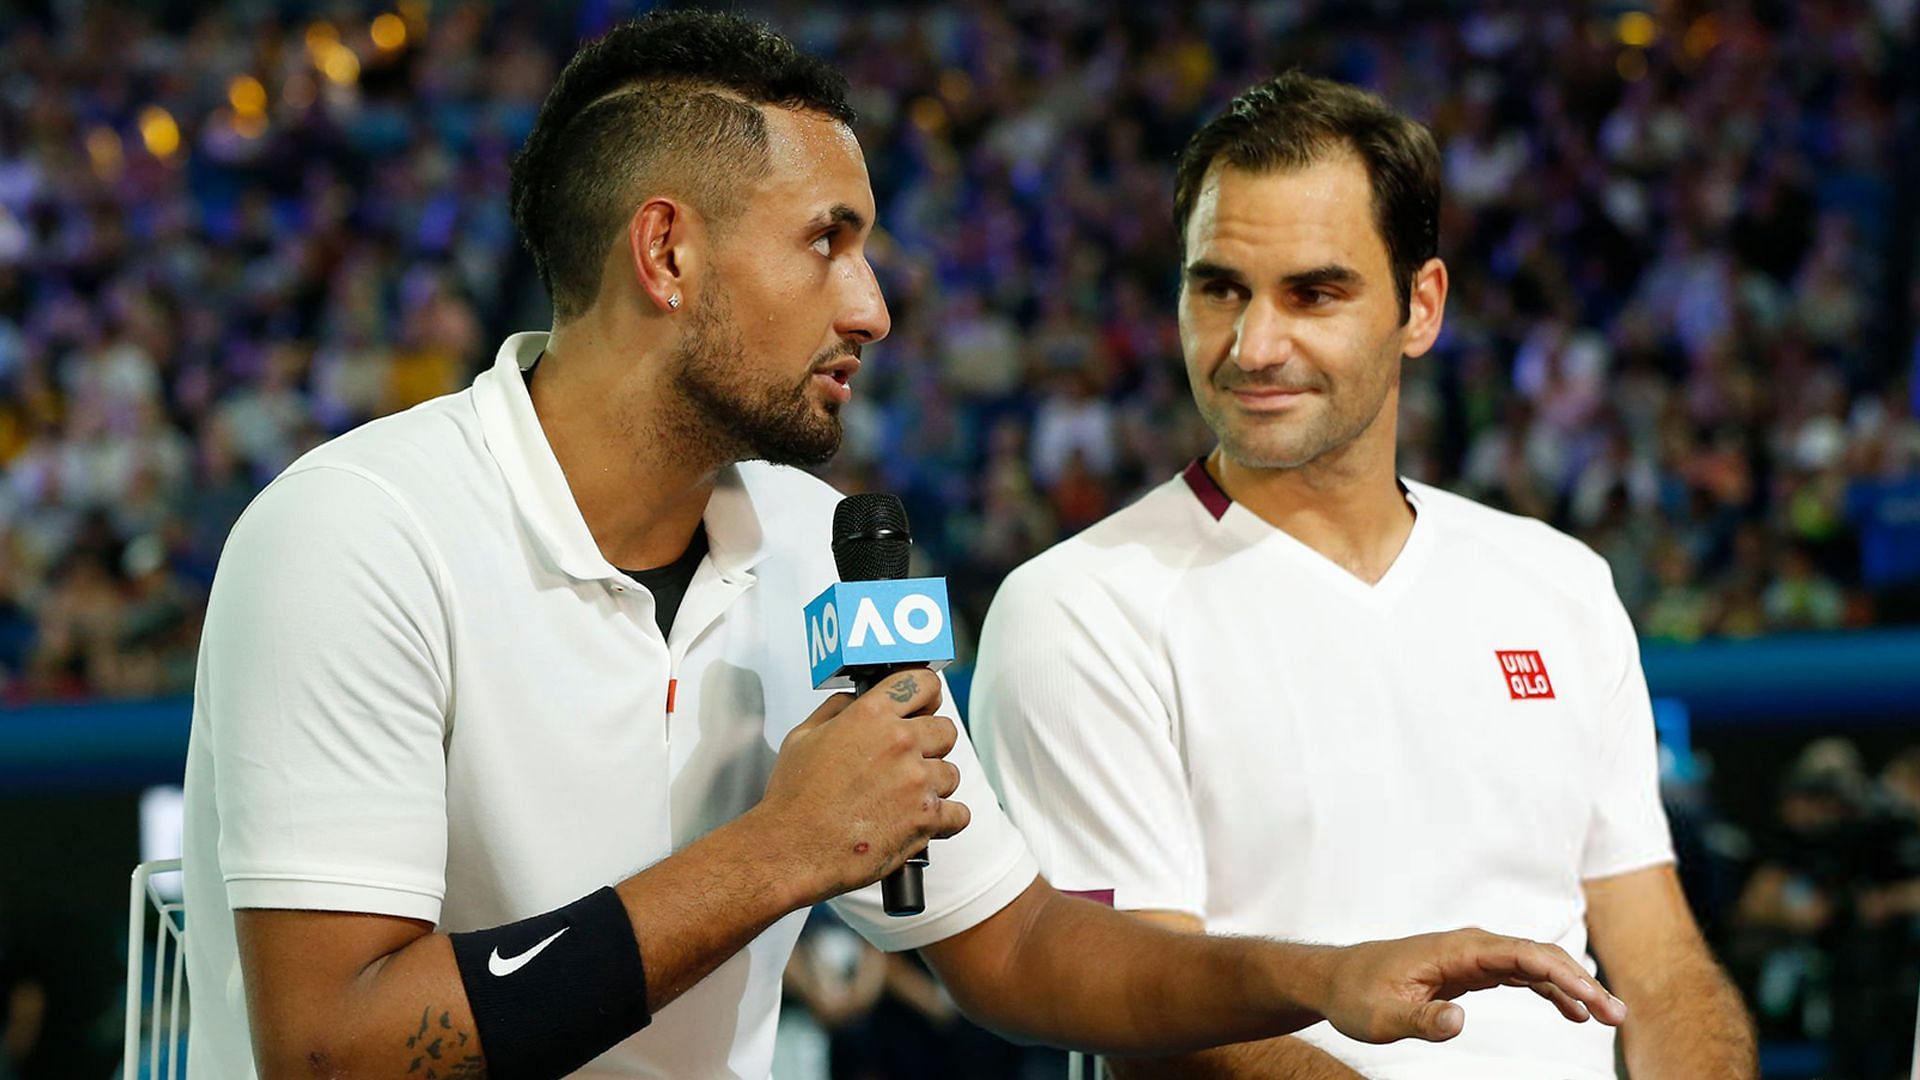 Nick Kyrgios recalls partying with Roger Federer during Laver Cup outing.